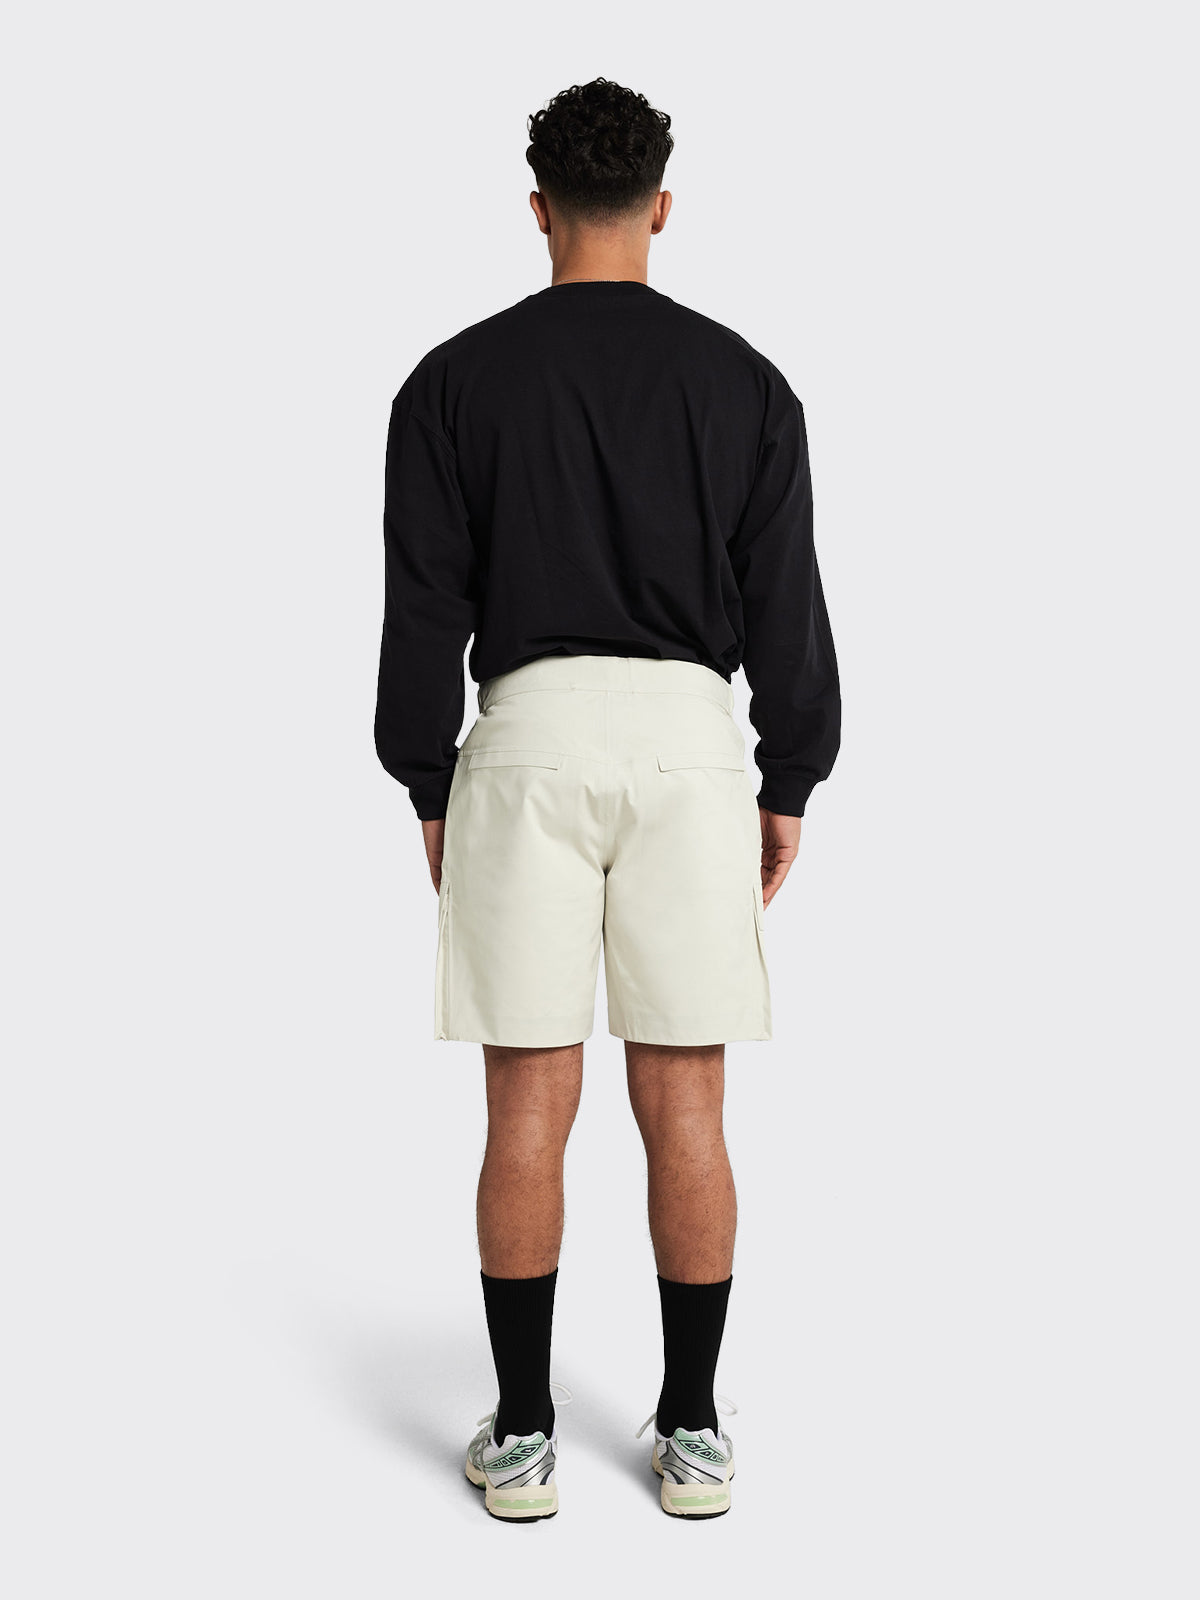 Man wearing Giske shorts by Blæst in the color Birch